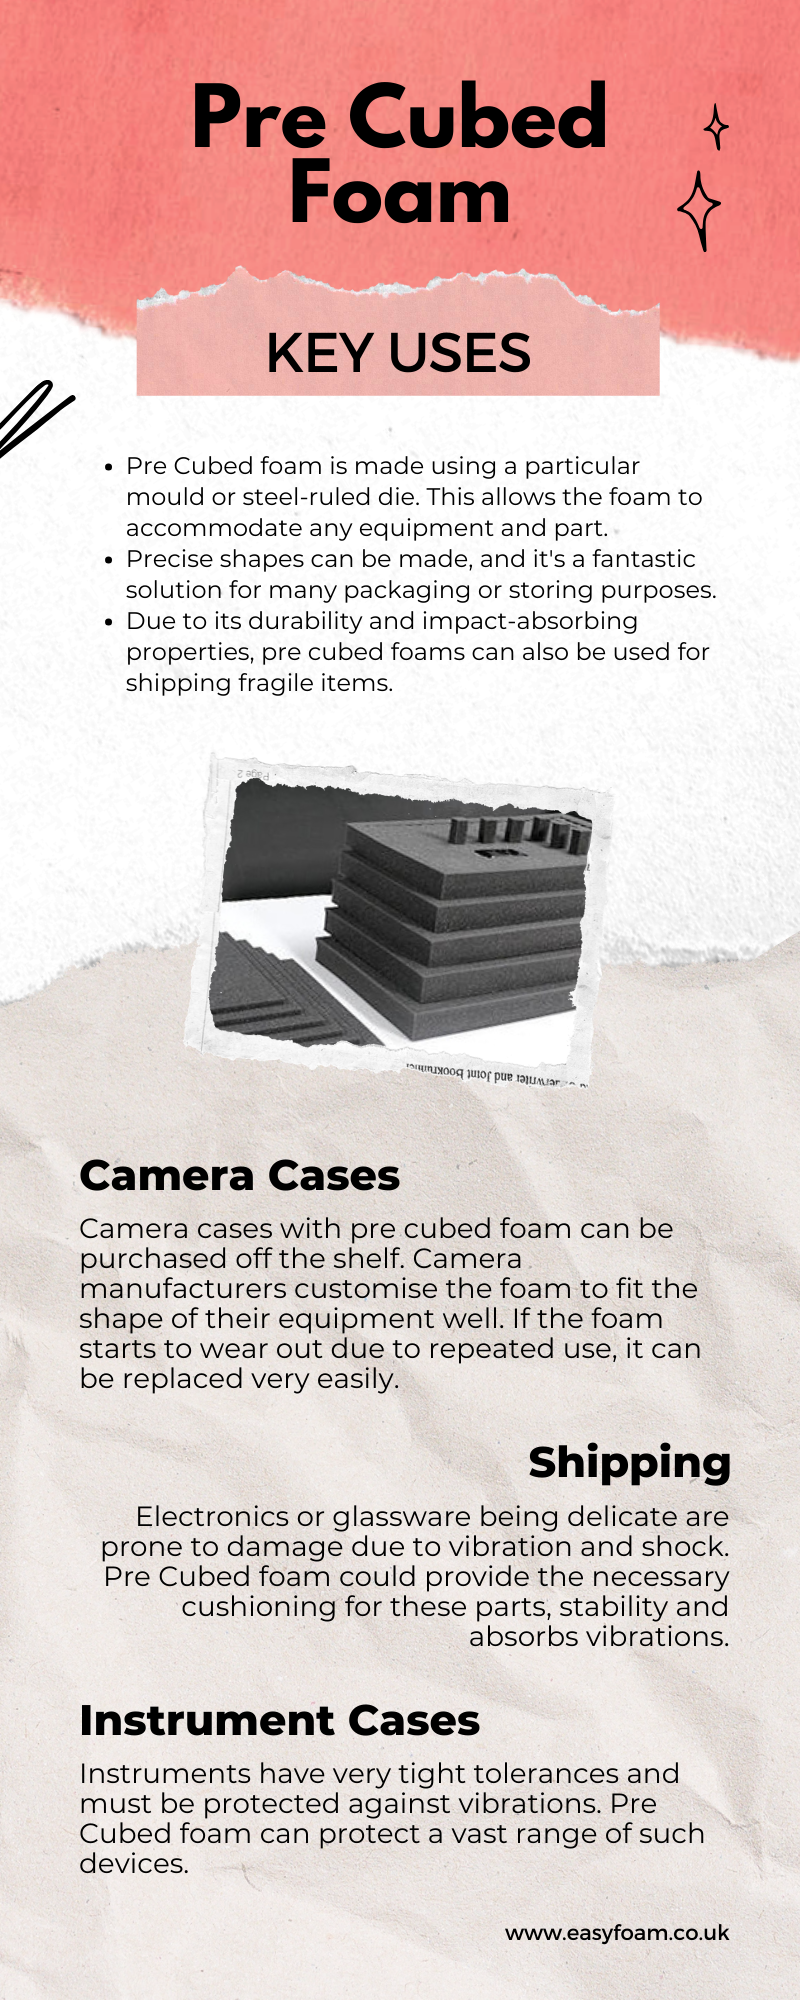 Uses of Pre-cubed foam infographic